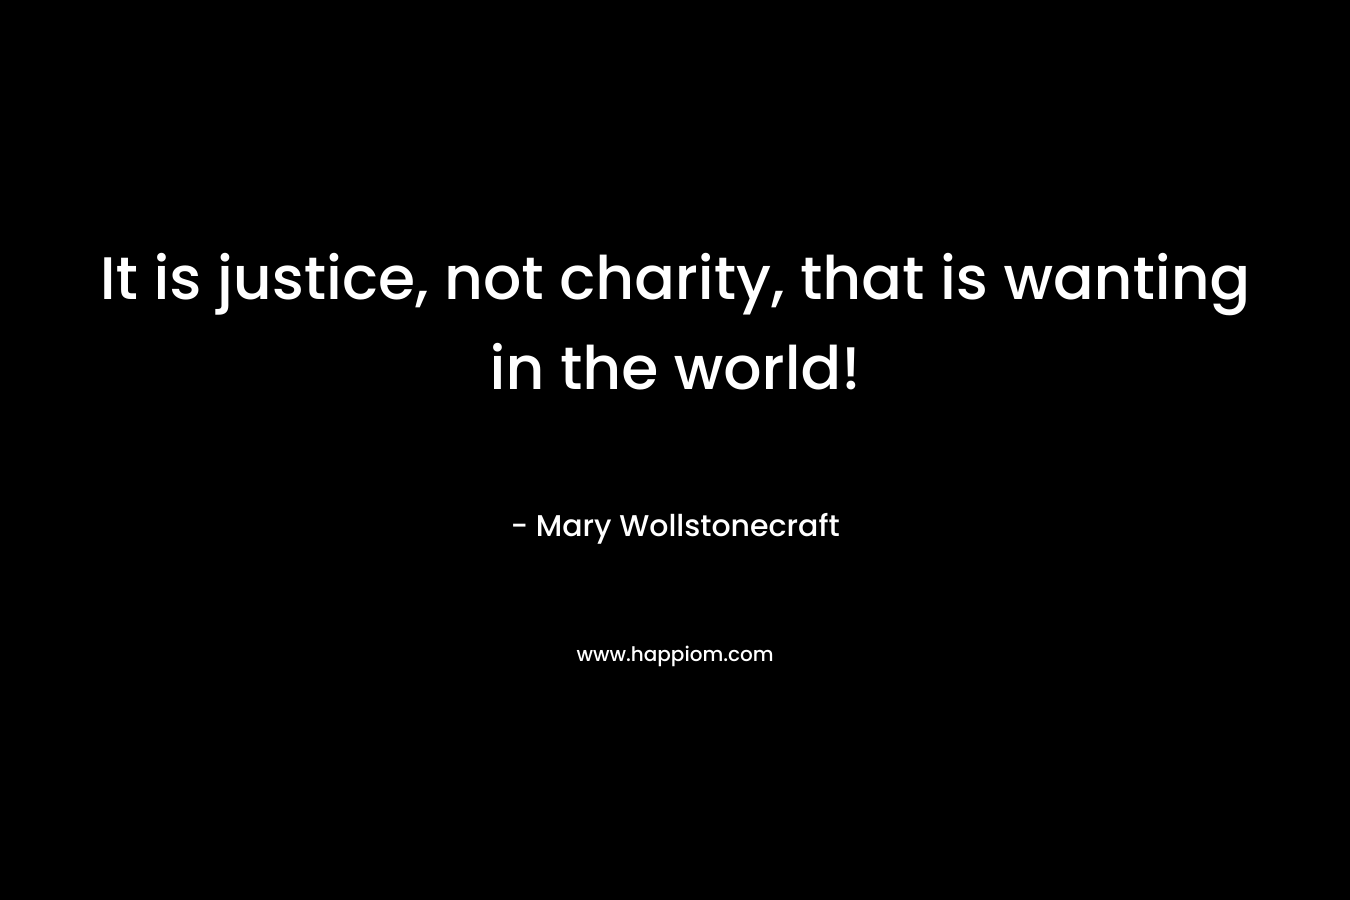 It is justice, not charity, that is wanting in the world! – Mary Wollstonecraft